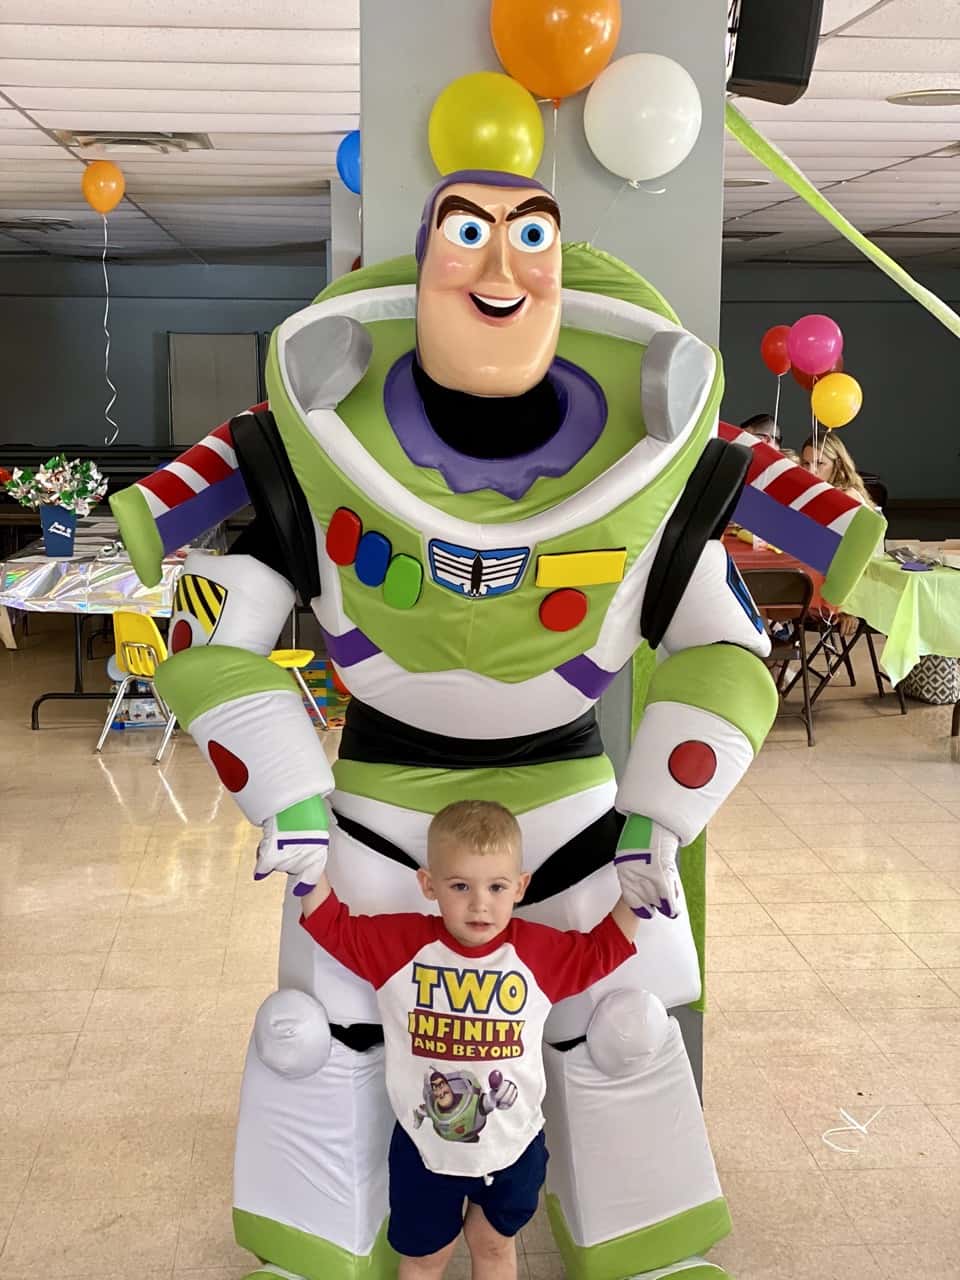 buzz lightyear with boy wearing a white and red shirt